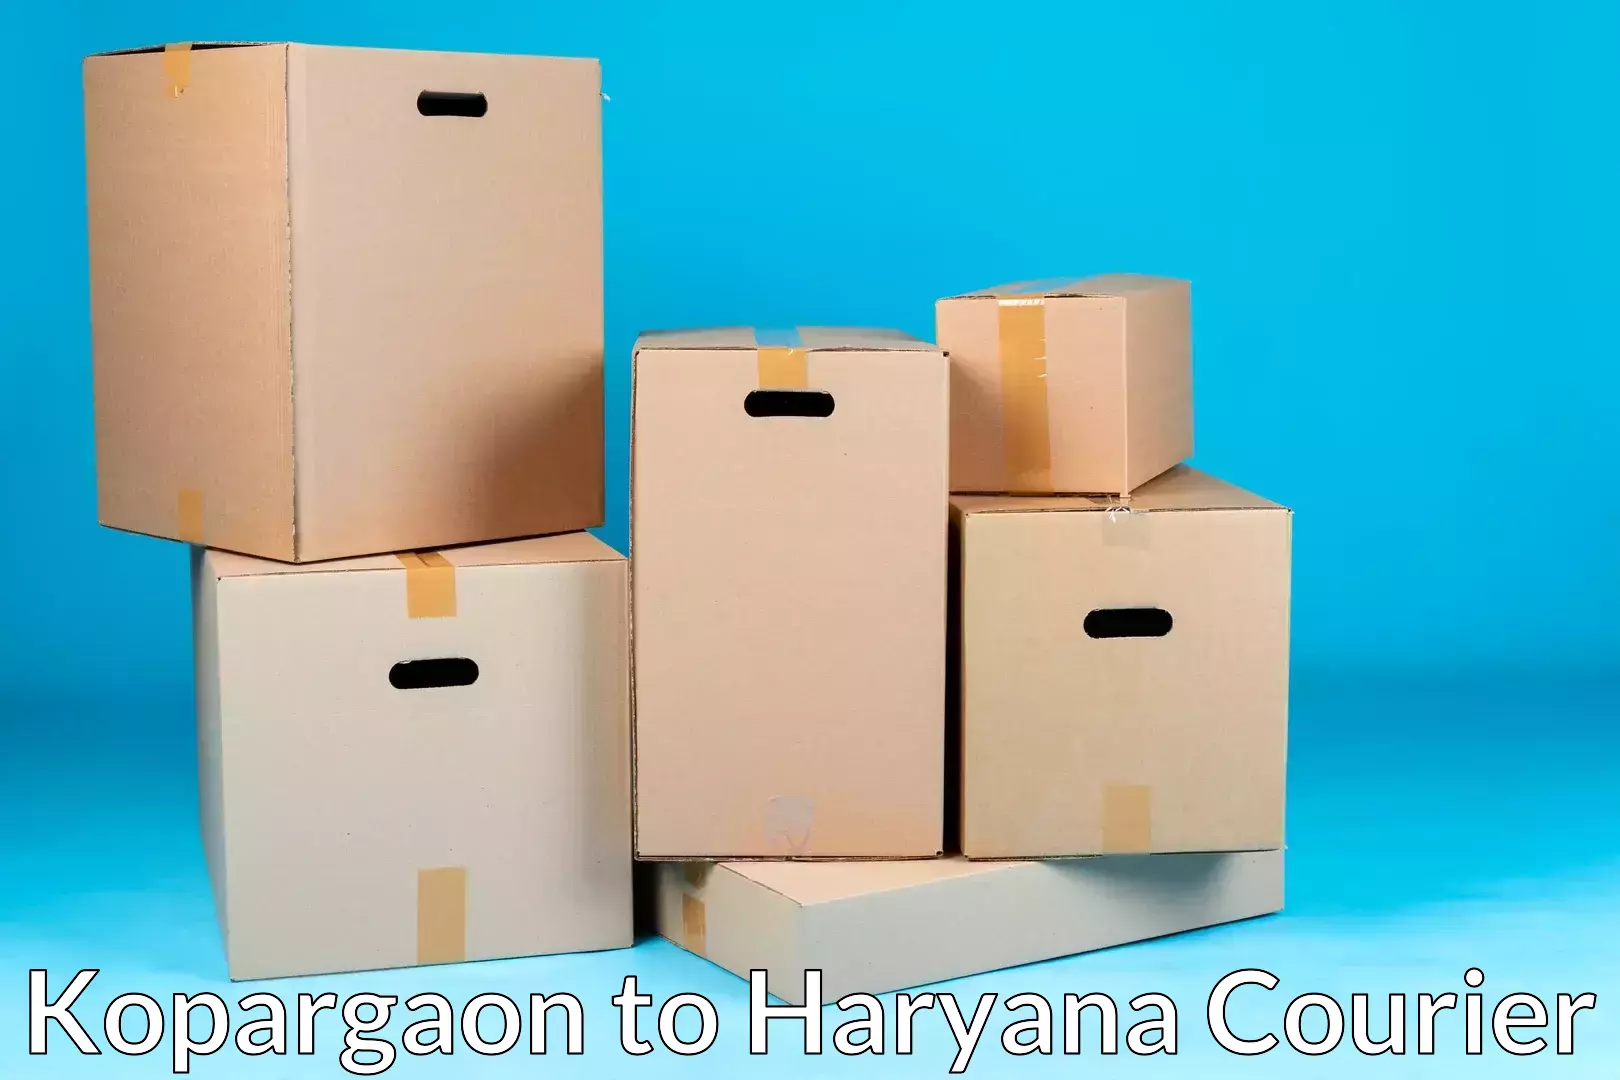 Furniture delivery service Kopargaon to Hisar